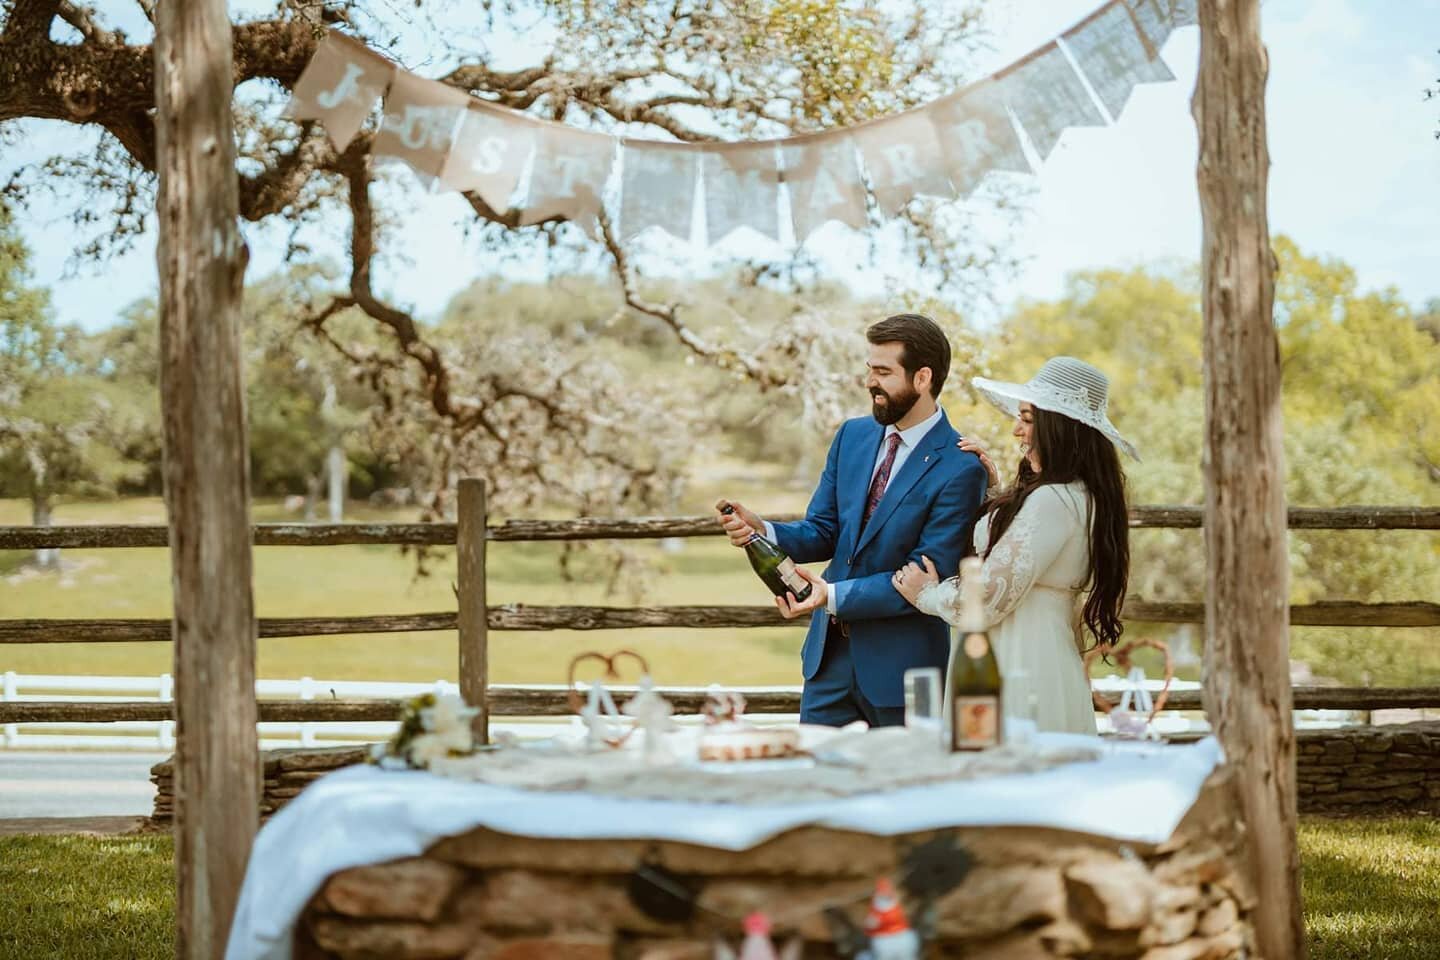 I'm so lucky to have met this amazing couple. Congratulations. 
.
#gettingmarried #marriage #austin #roumdtoptx #magnolia #hgtv #boho #posh #photography #photographer #onceinalifetime